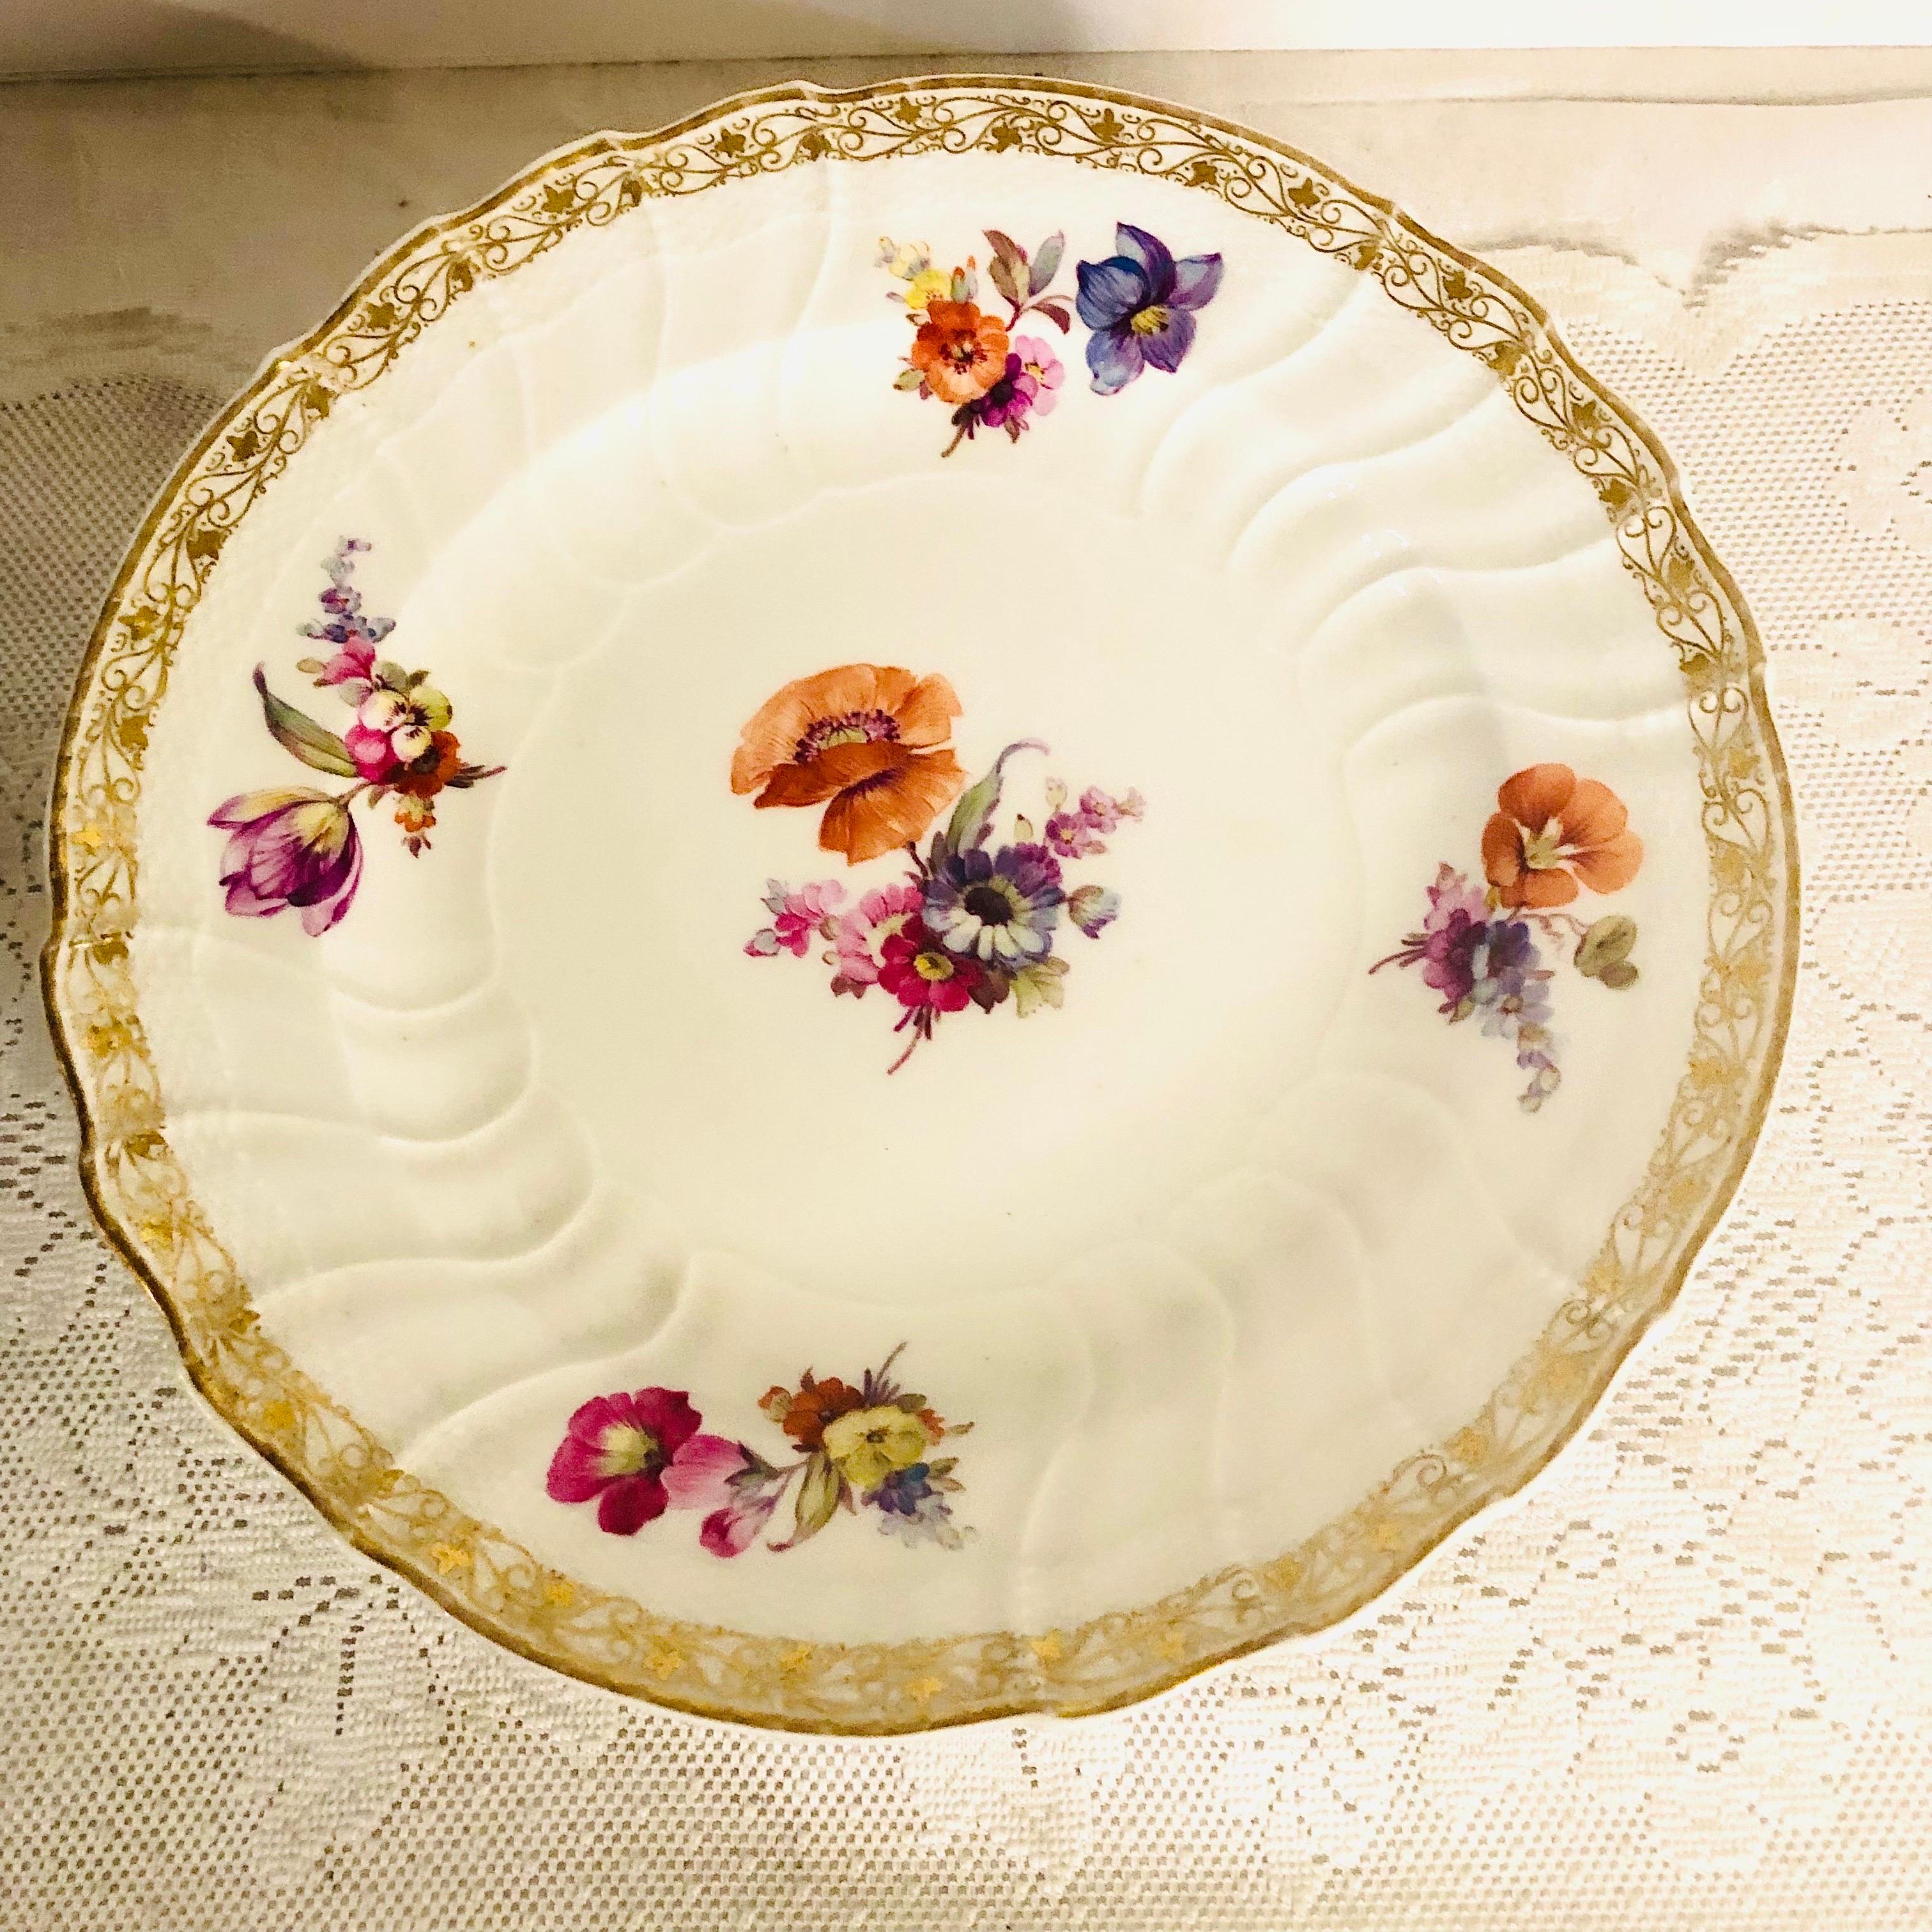 12 KPM Dinner Plates, Each Hand-Painted with a Different Central Flower Bouquet For Sale 4